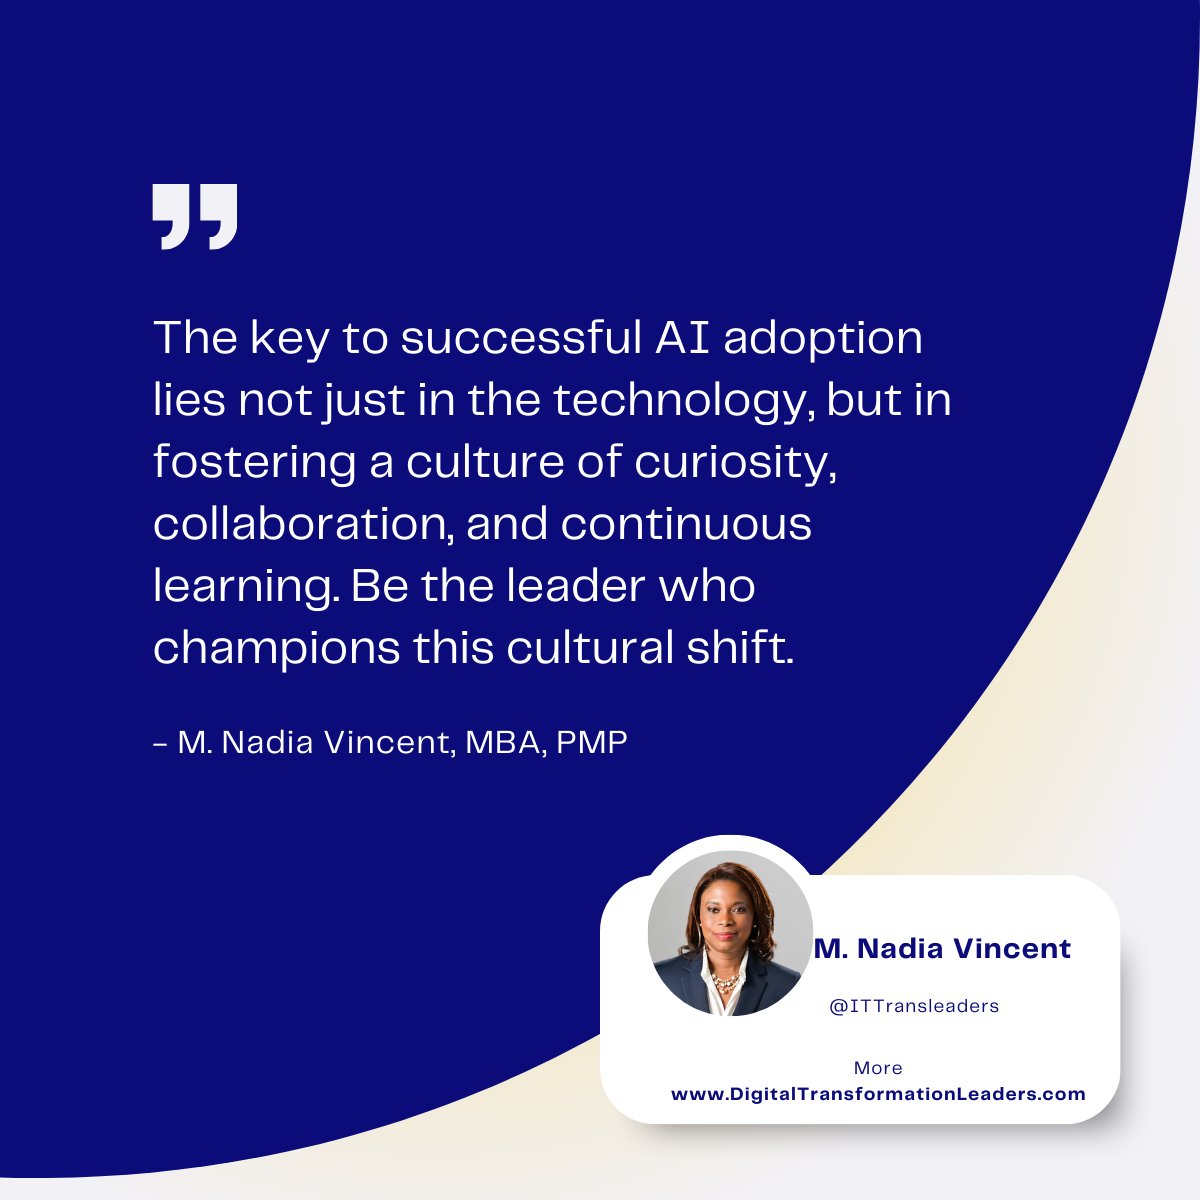 The key to successful AI adoption lies not just in the technology, but in fostering a culture of curiosity, collaboration, and continuous learning. Be the leader who champions this cultural shift. M. Nadia Vincent #technology #ai #innovation #learning #leadership